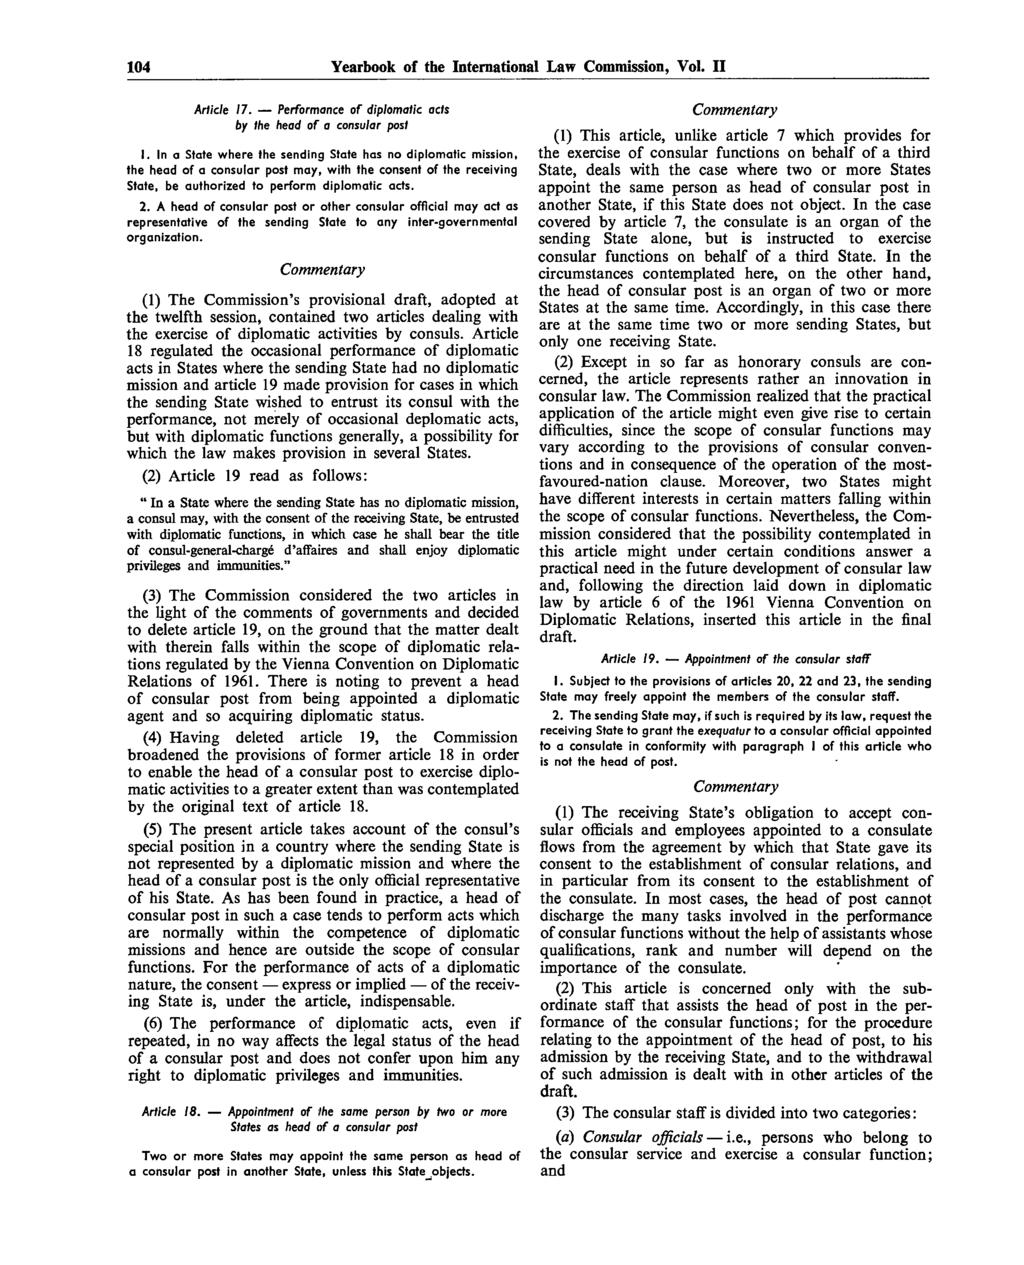 104 Yearbook of the International Law Commission, Vol. II Article 17. Performance of diplomatic acts by the head of a consular post 1.